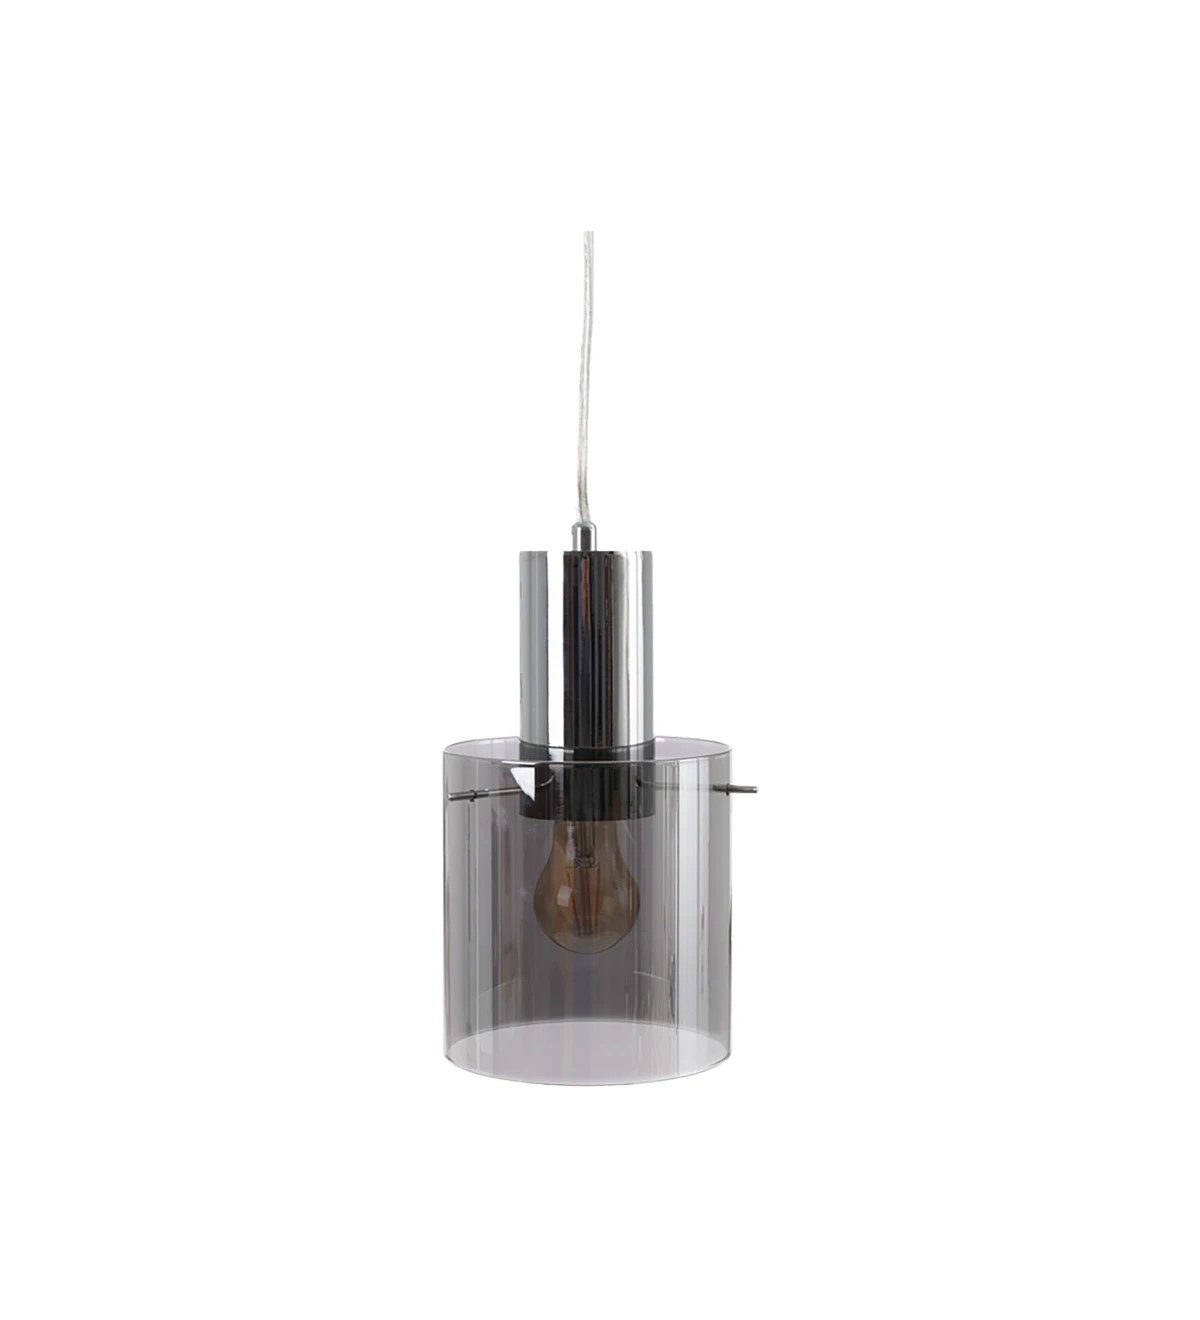 Suspended ceiling lamp in silver and glass